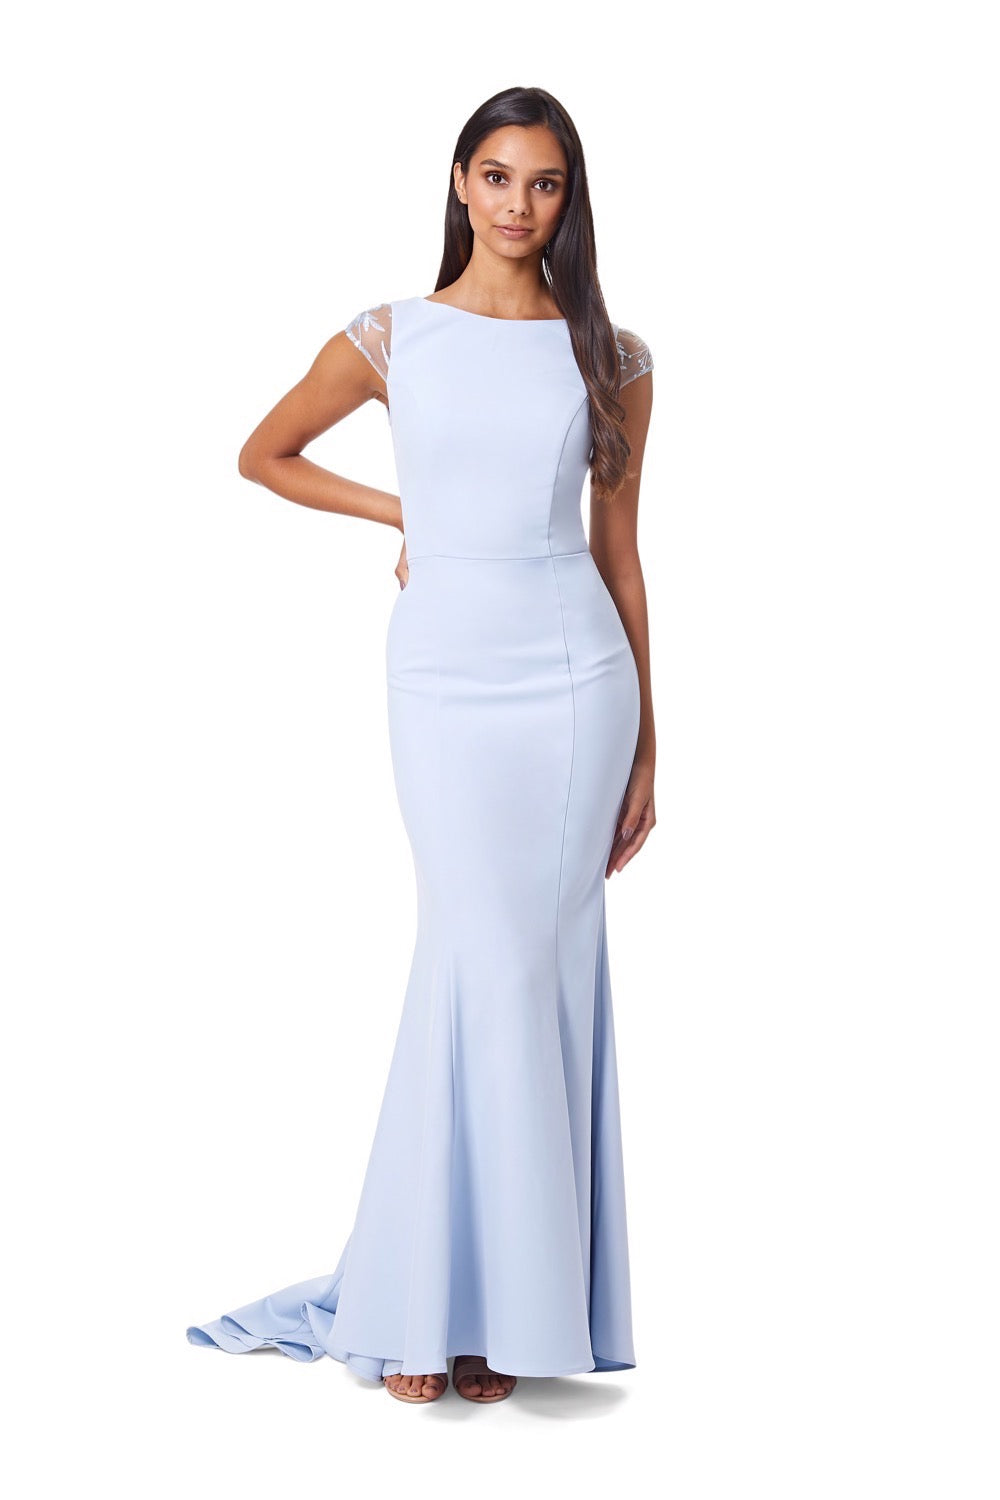 Masa Fishtail Maxi Dress with Lace Cap Sleeves and Embroidered Button Back, UK 18 / US 14 / EU 46 / Powder Blue